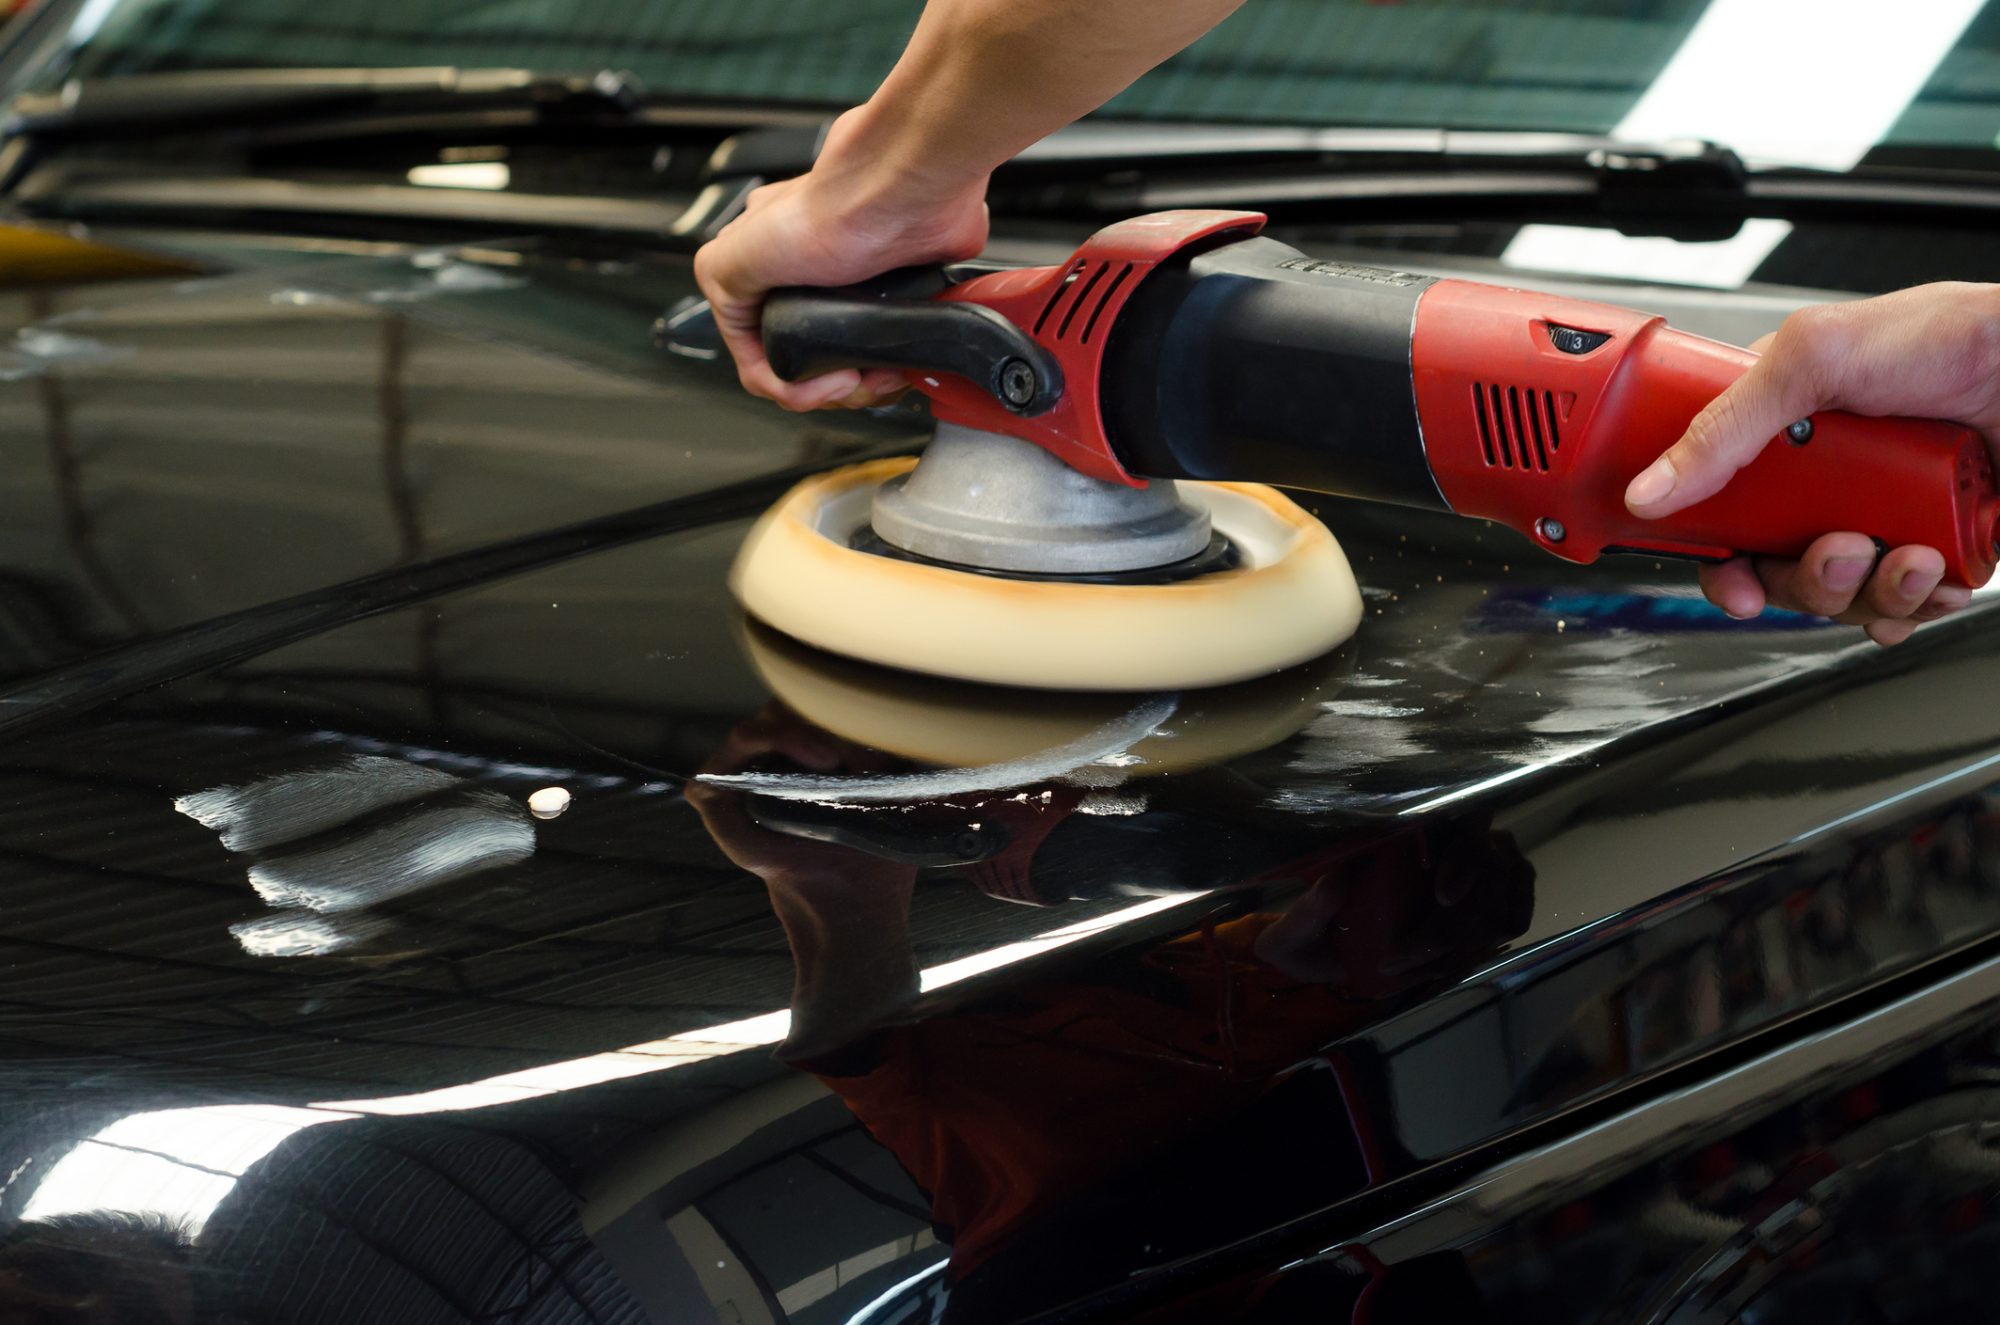 Hands with daul action polisher. polishing on car surface. hand and foam pad in blur motion from vibration of polisher machine